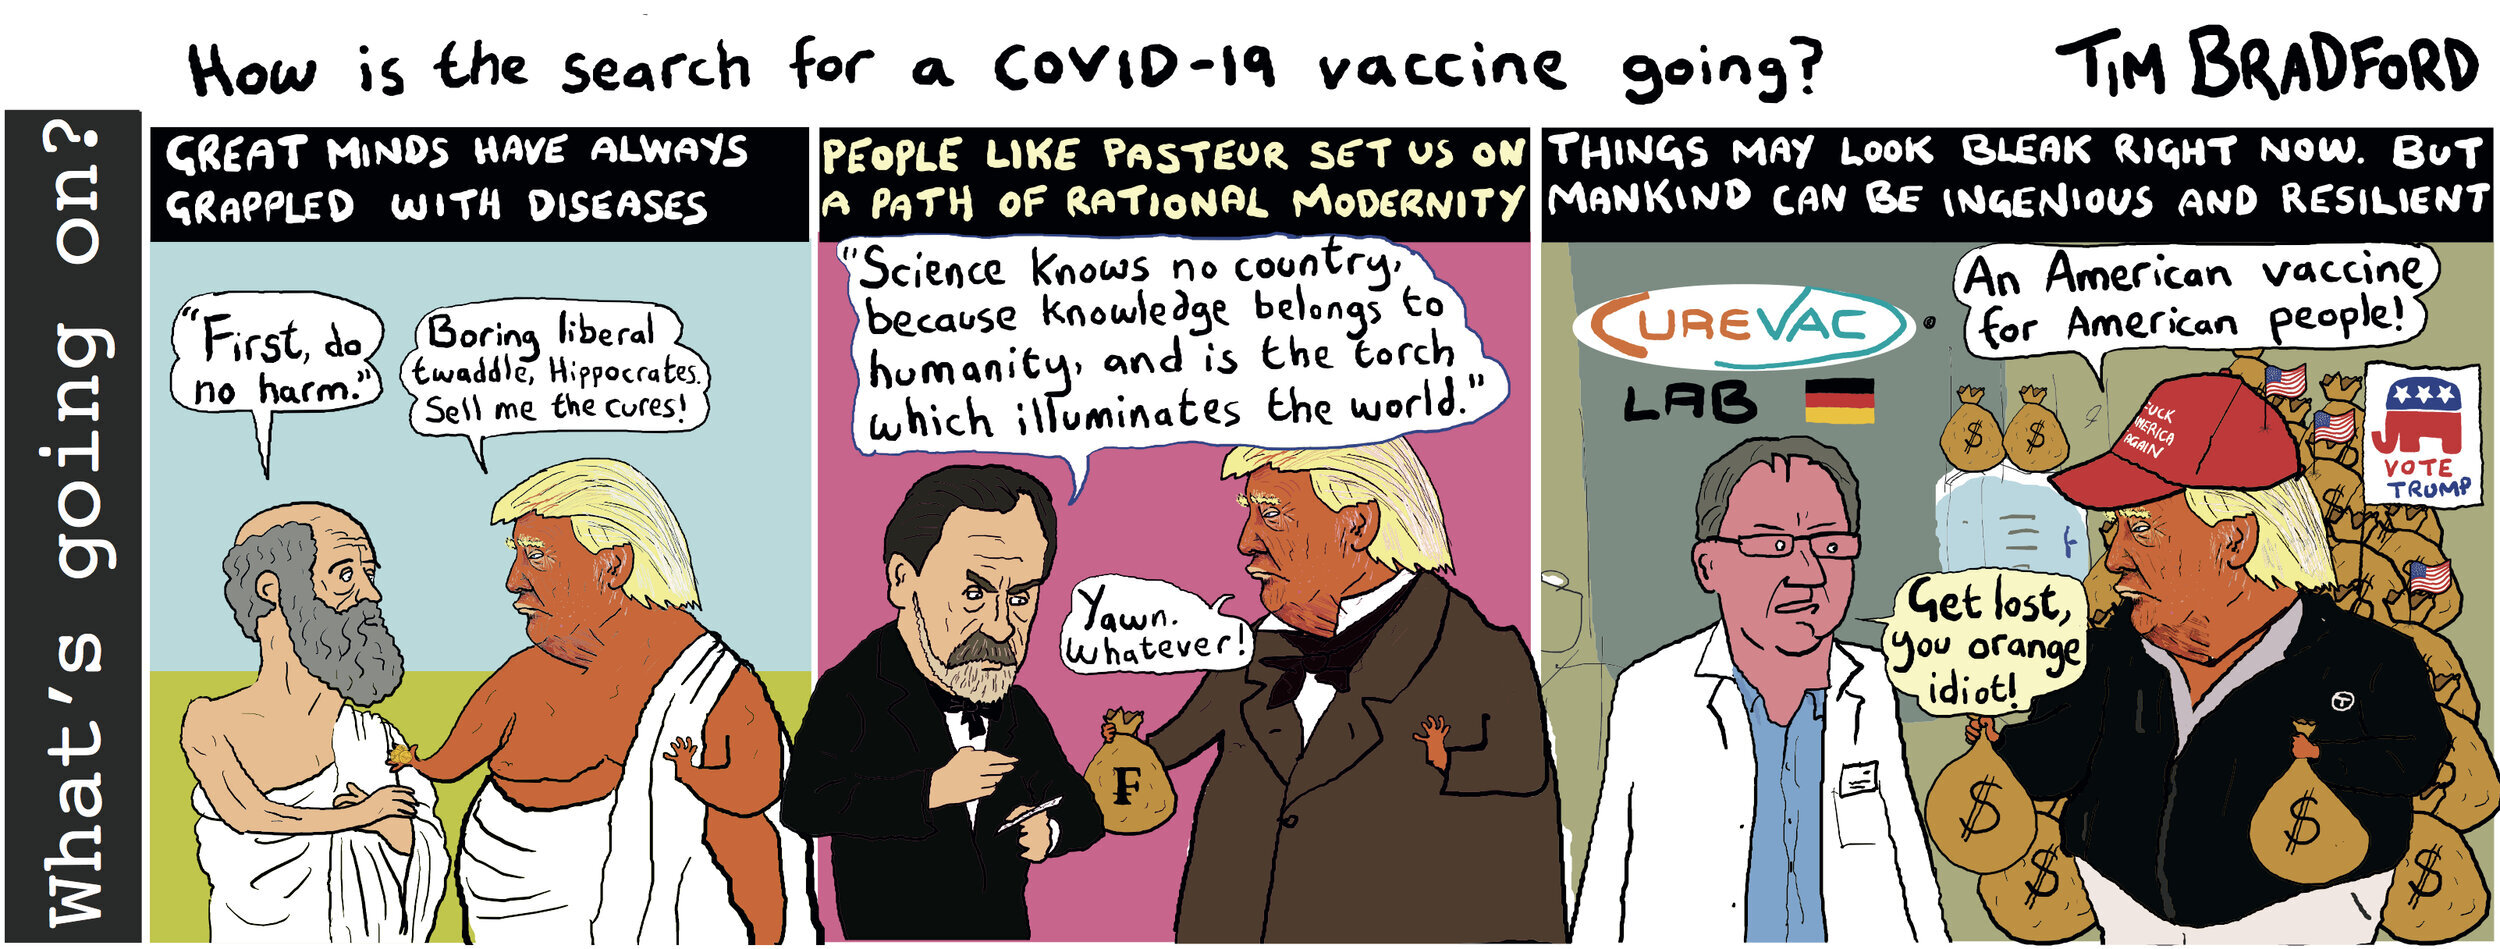 How is the search for a COVID-19 vaccine going? - 17/03/2020